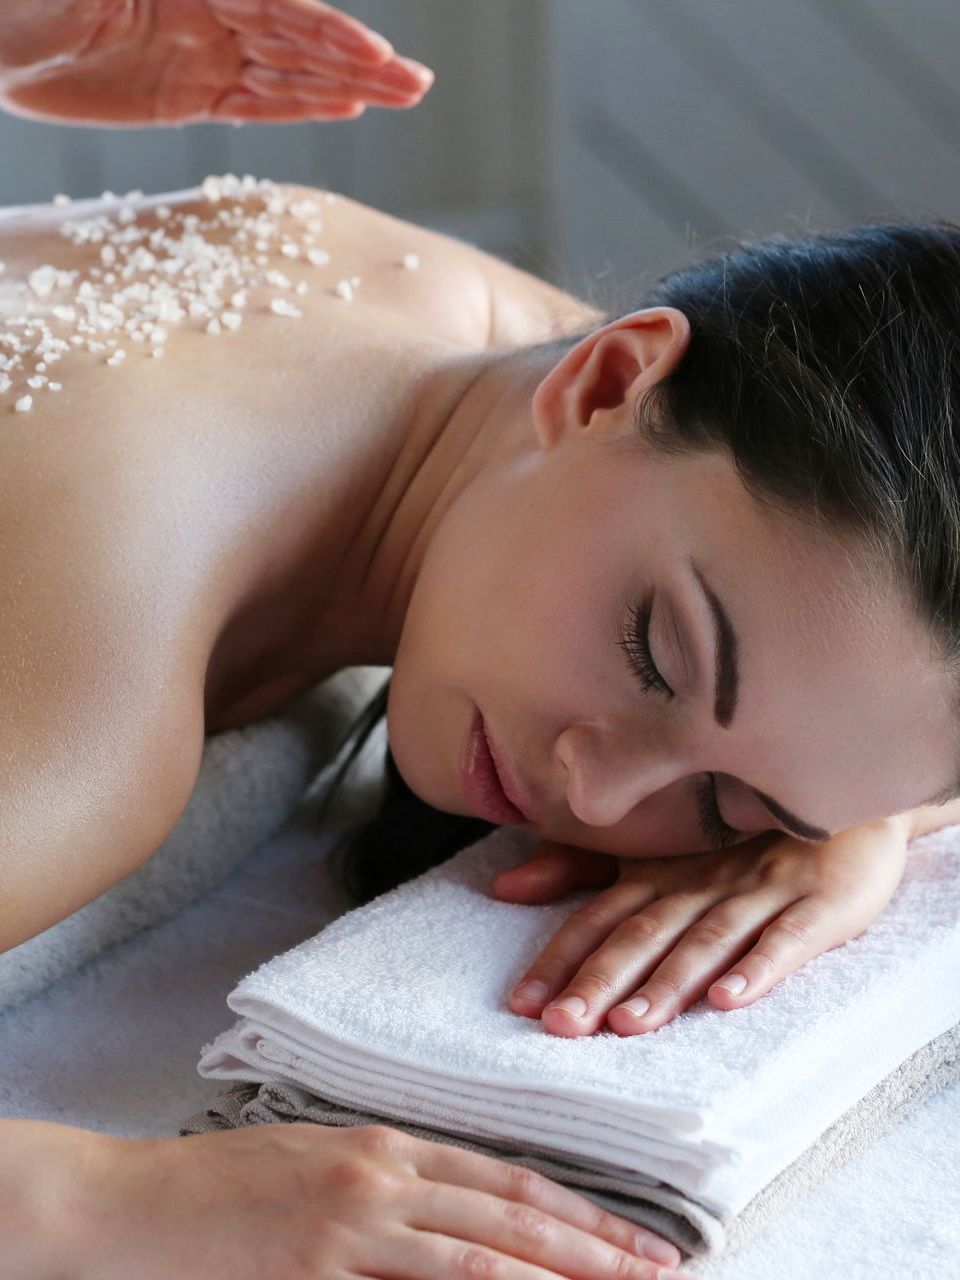 a woman is getting a massage with sea salt on her back